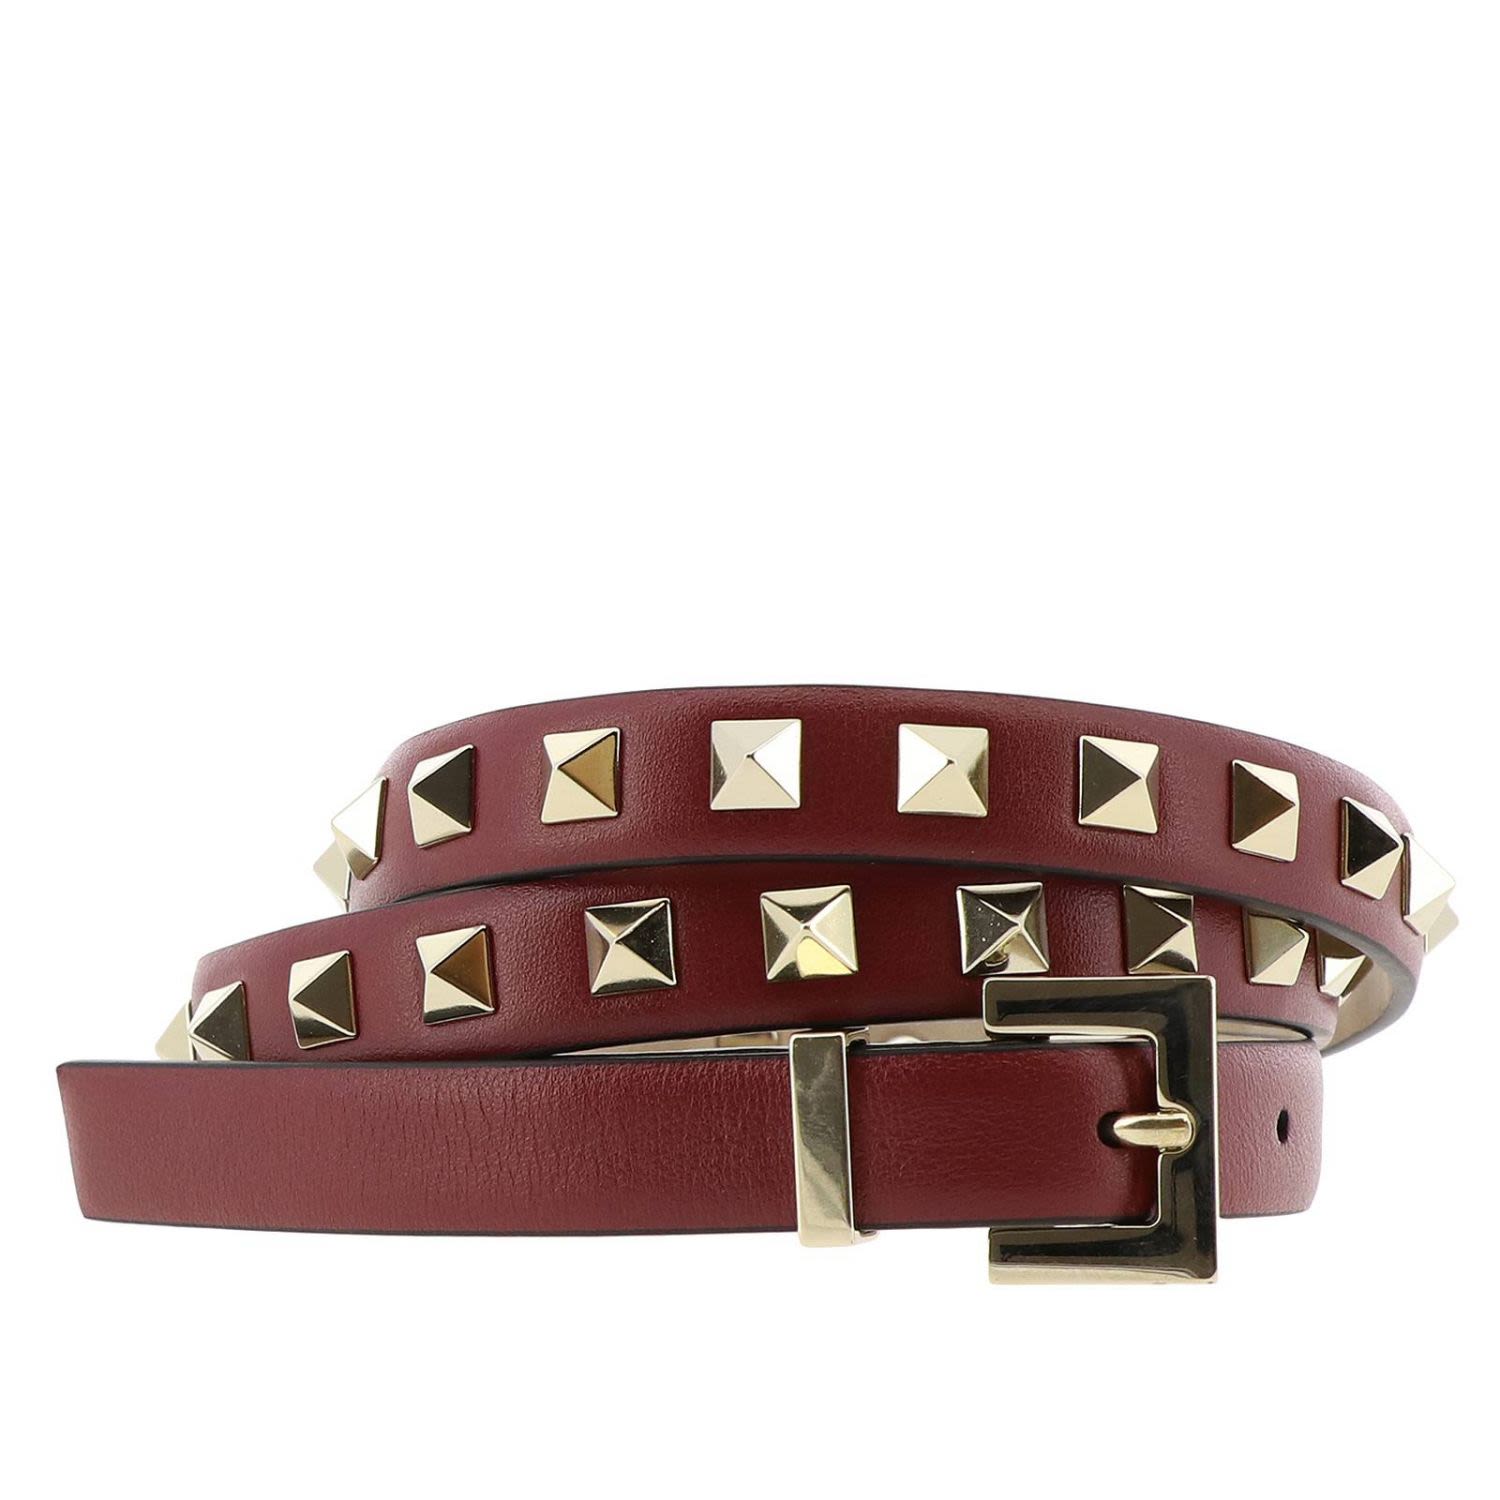 italist | Best price in the market for Valentino Garavani Valentino Garavani Belt Belt Women ...